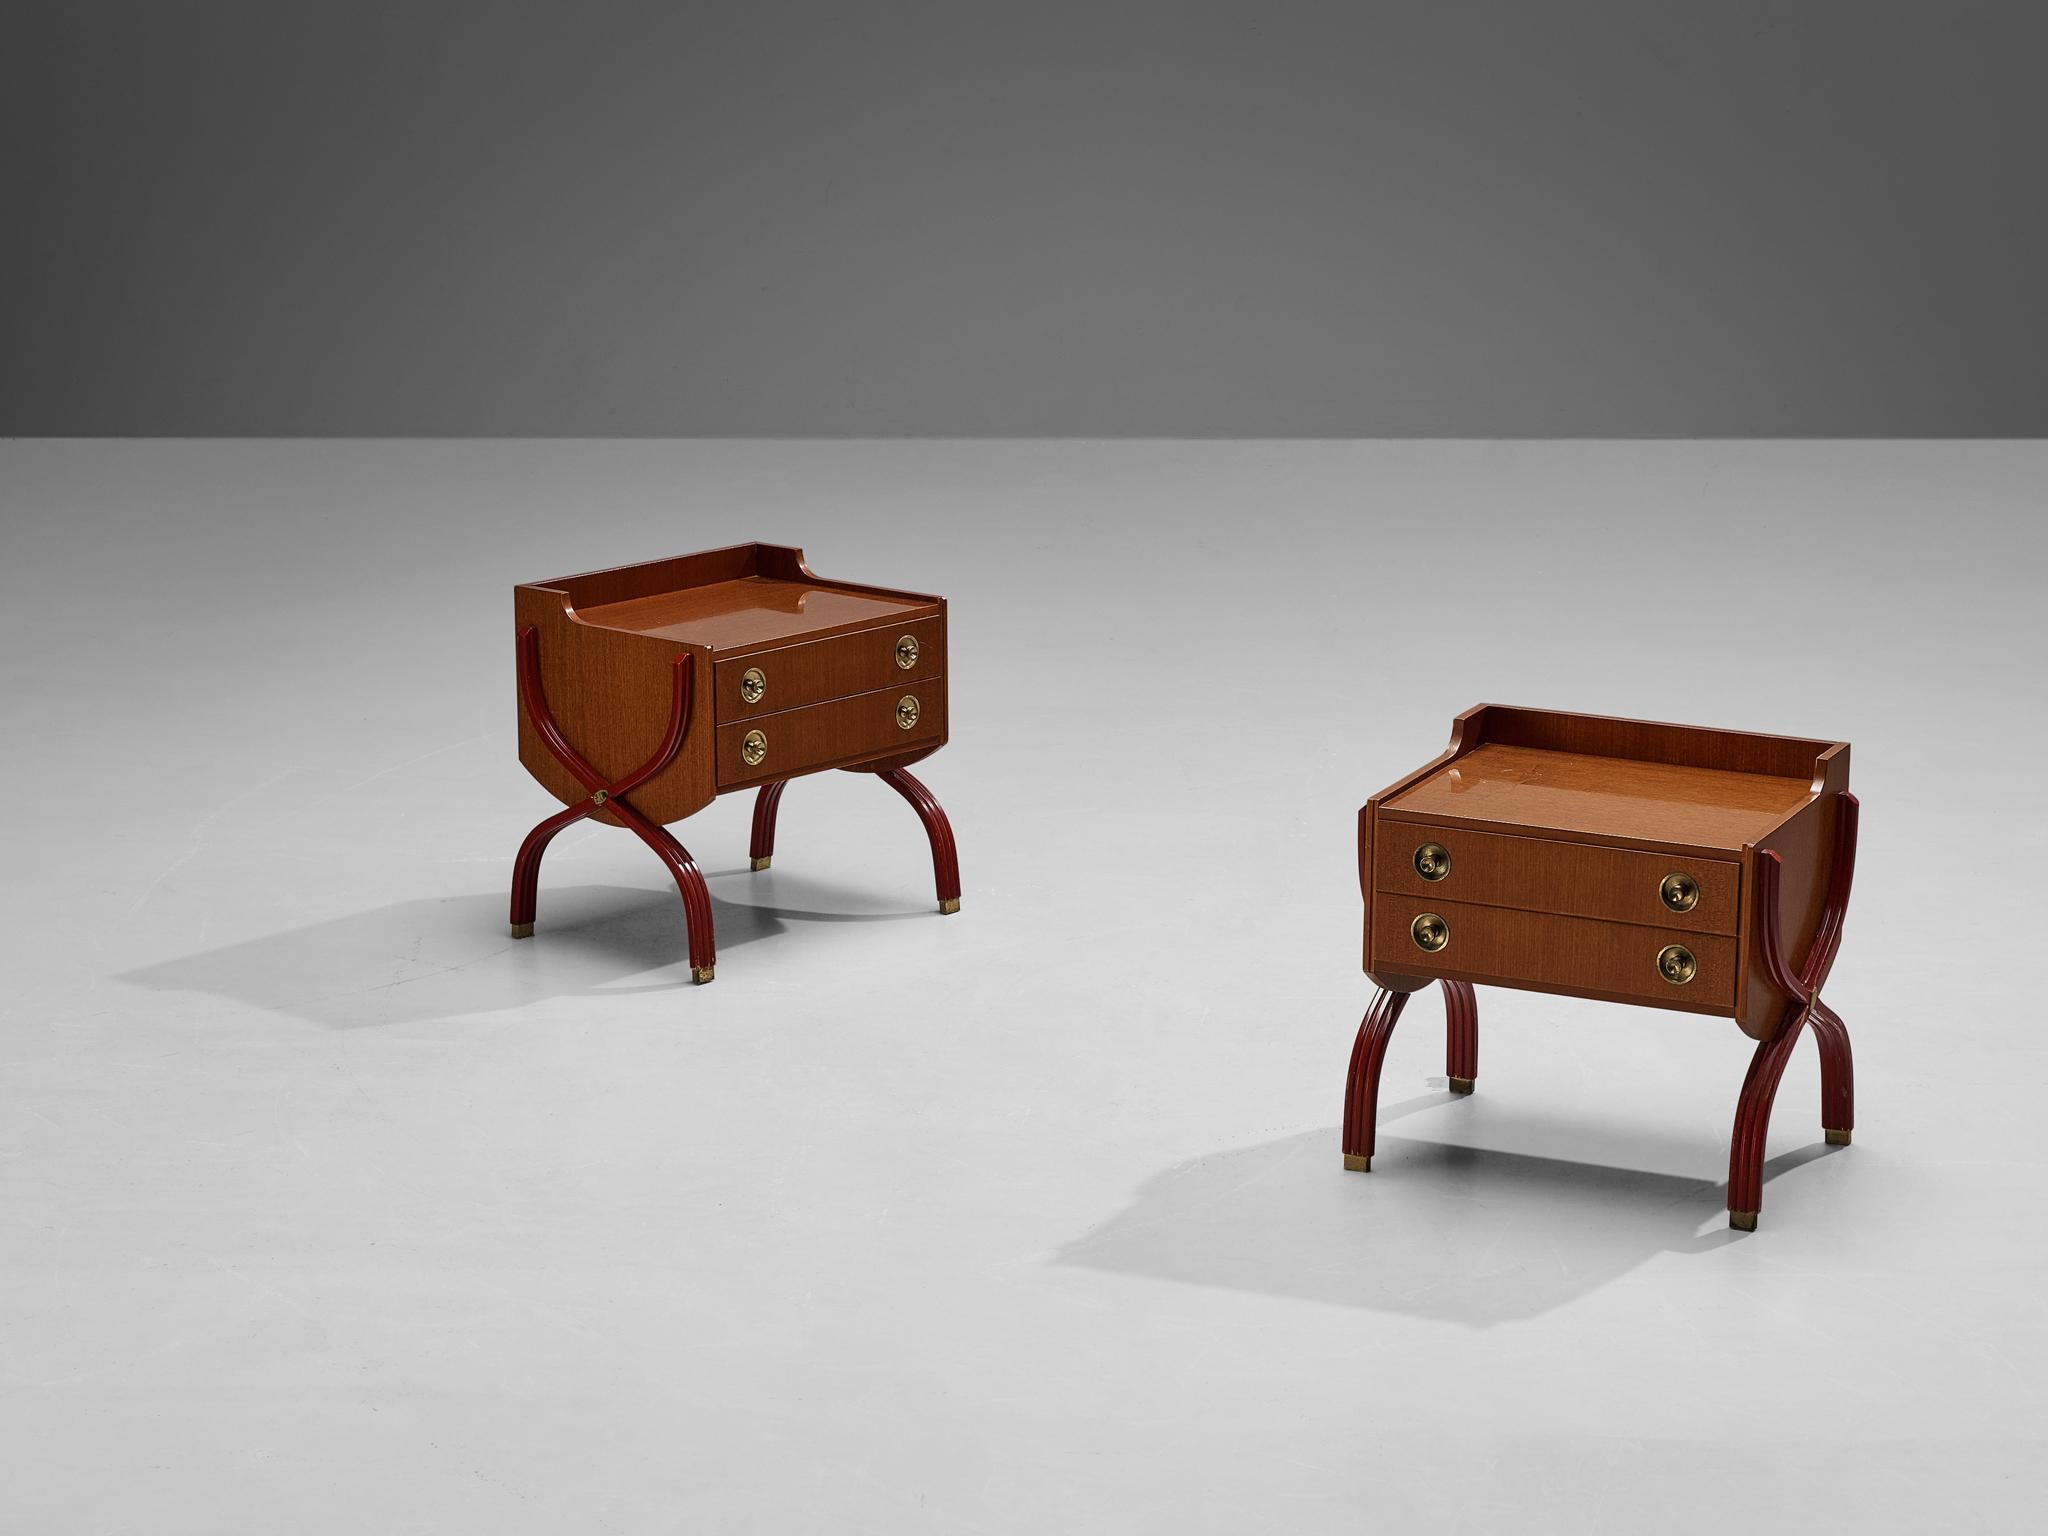 Tosi Arredamenti, pair of cabinets or bedside tables, mahogany, brass, lacquered wood, Italy, 1960s

This exquisite pair of Italian cabinets, crafted by Tosi Arredamenti, promises to imbue one's bedroom with an air of elegance and sophistication.